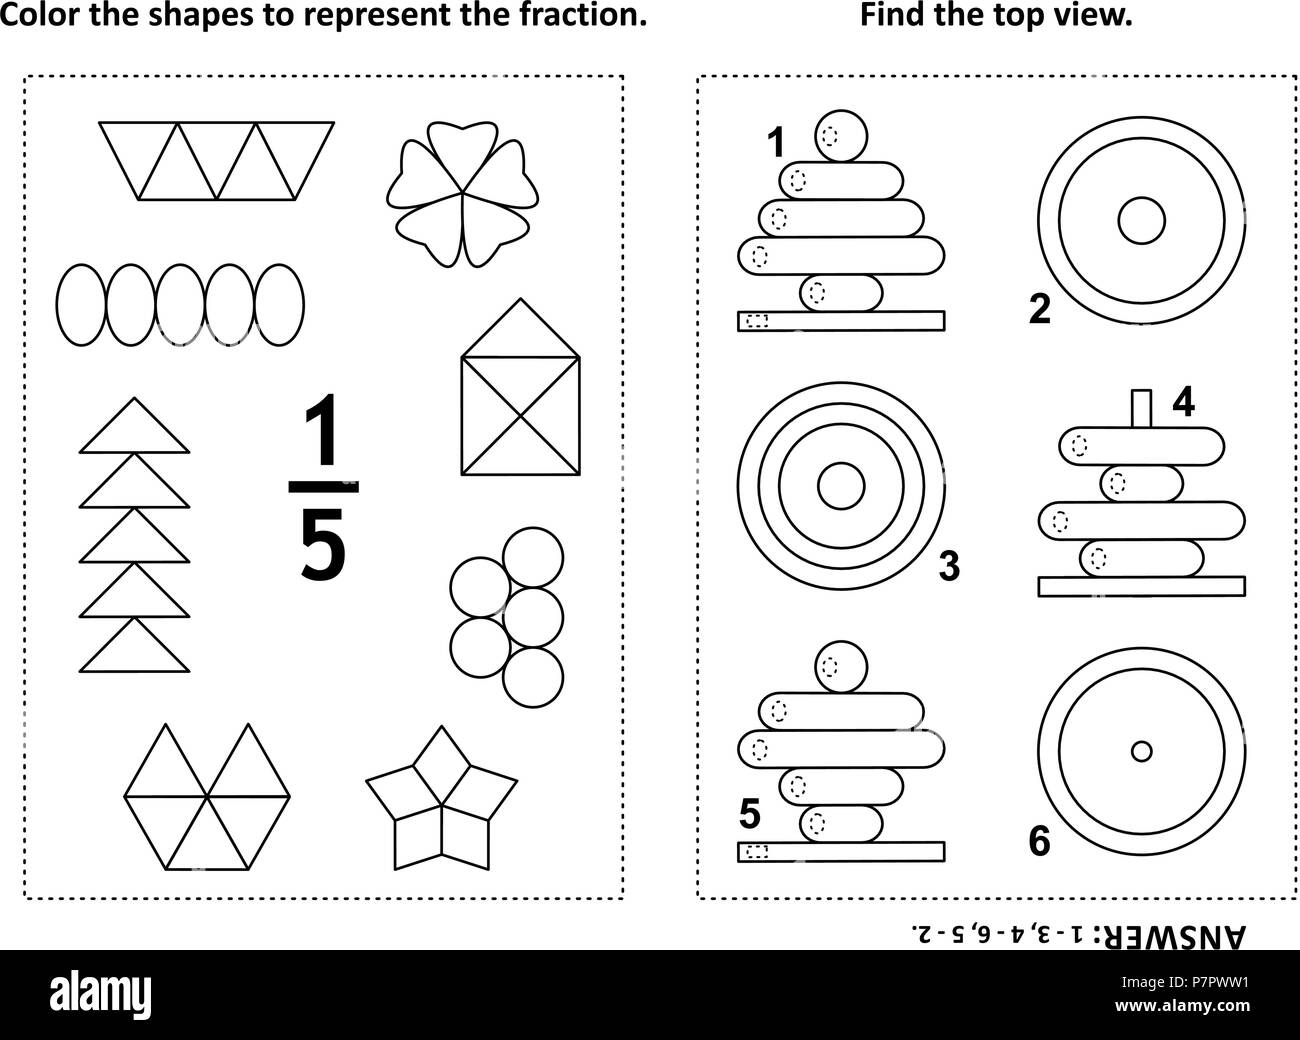 Two visual math puzzles and coloring pages. Color the shapes to represent the fraction. Find the top view. Black and white. Answer included. Stock Vector